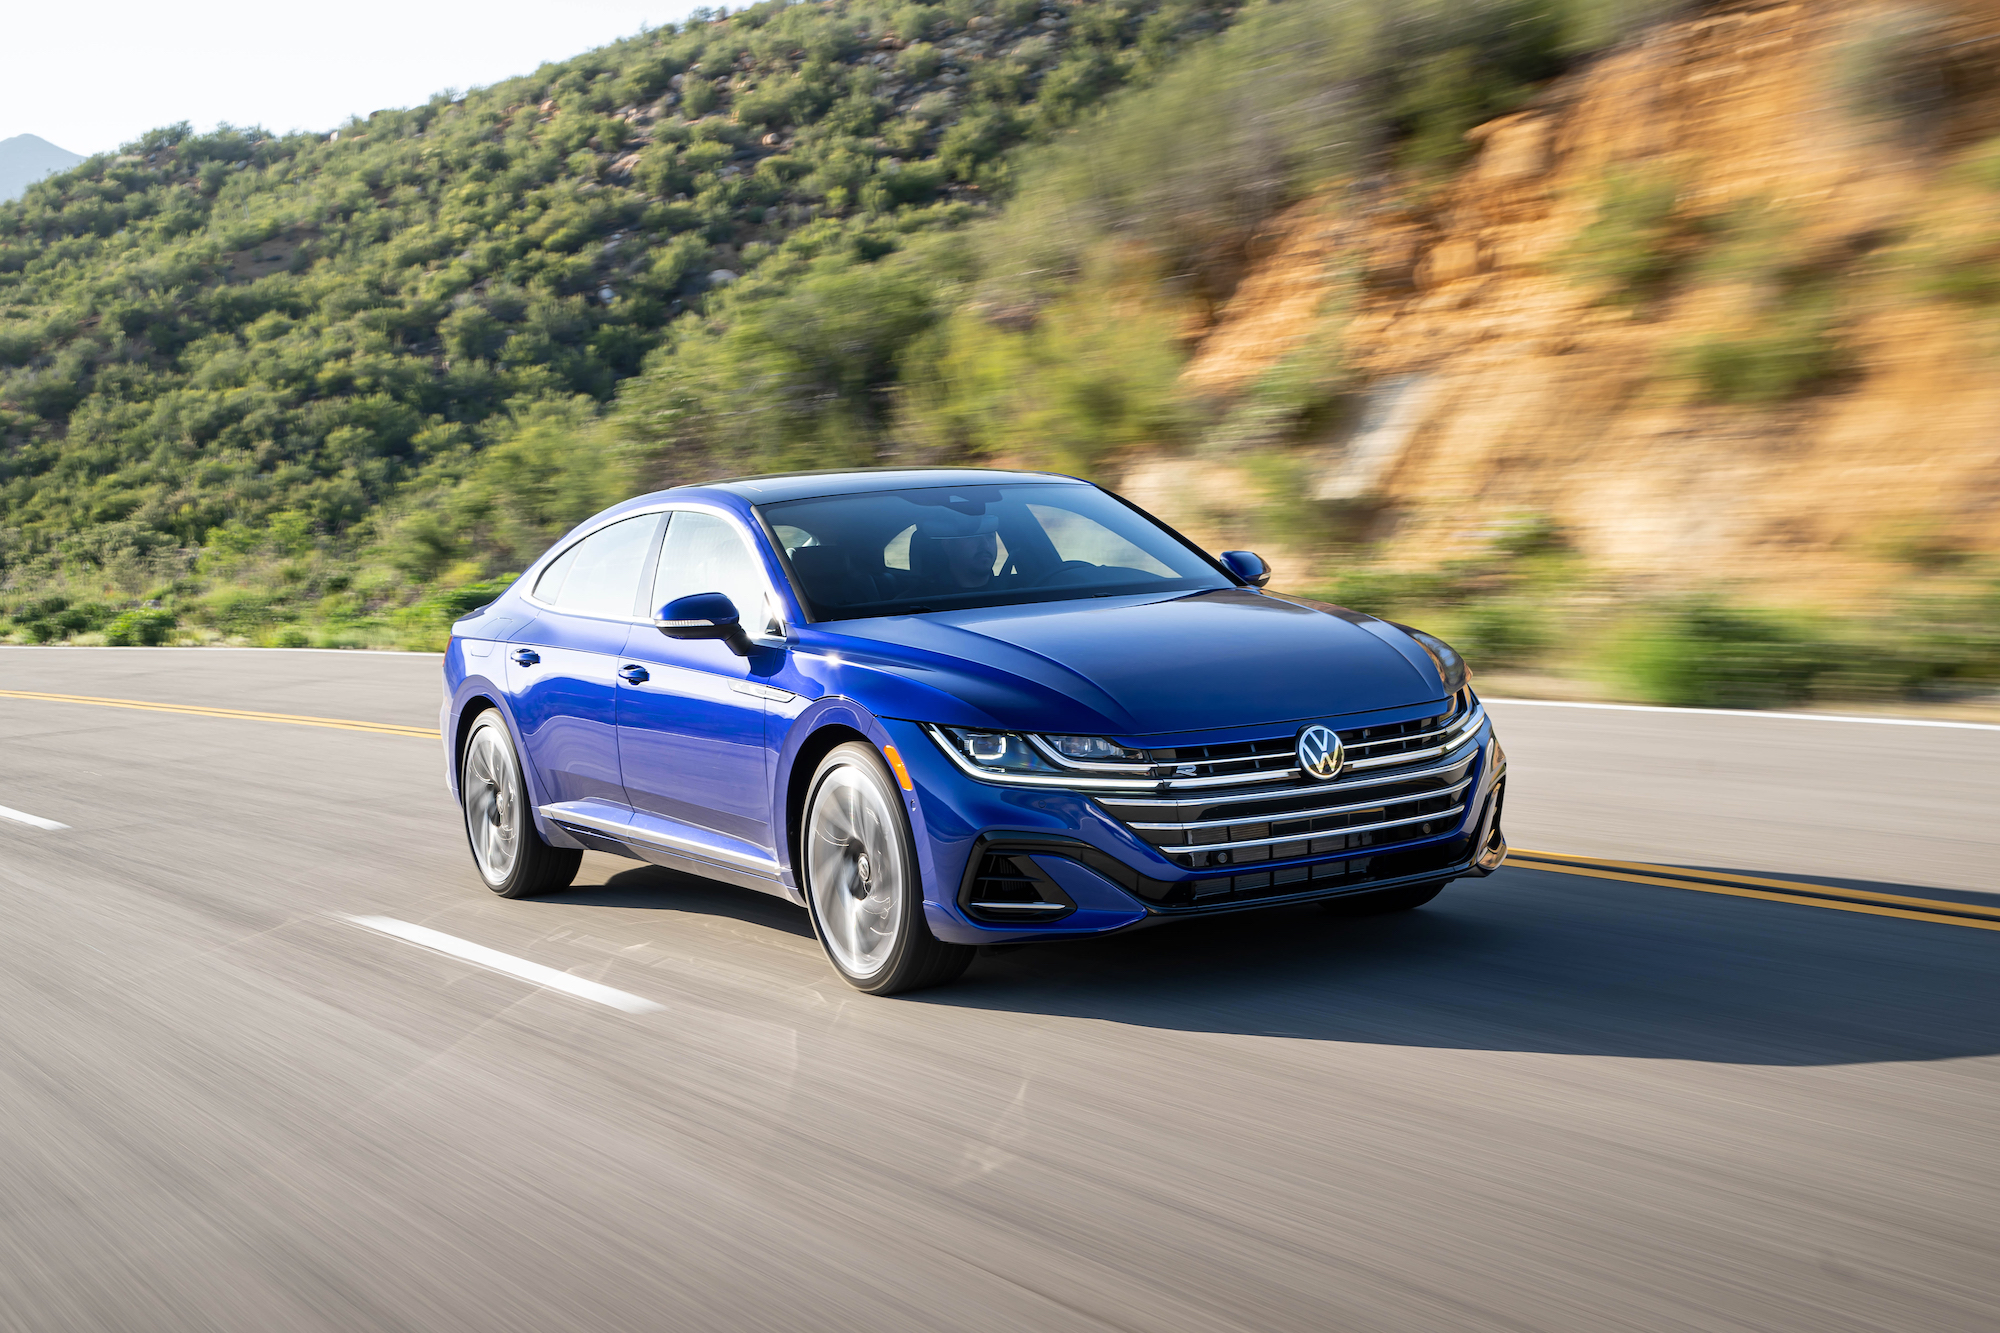 VW Arteon dropped earlier than planned, no 2024 model Auto Recent